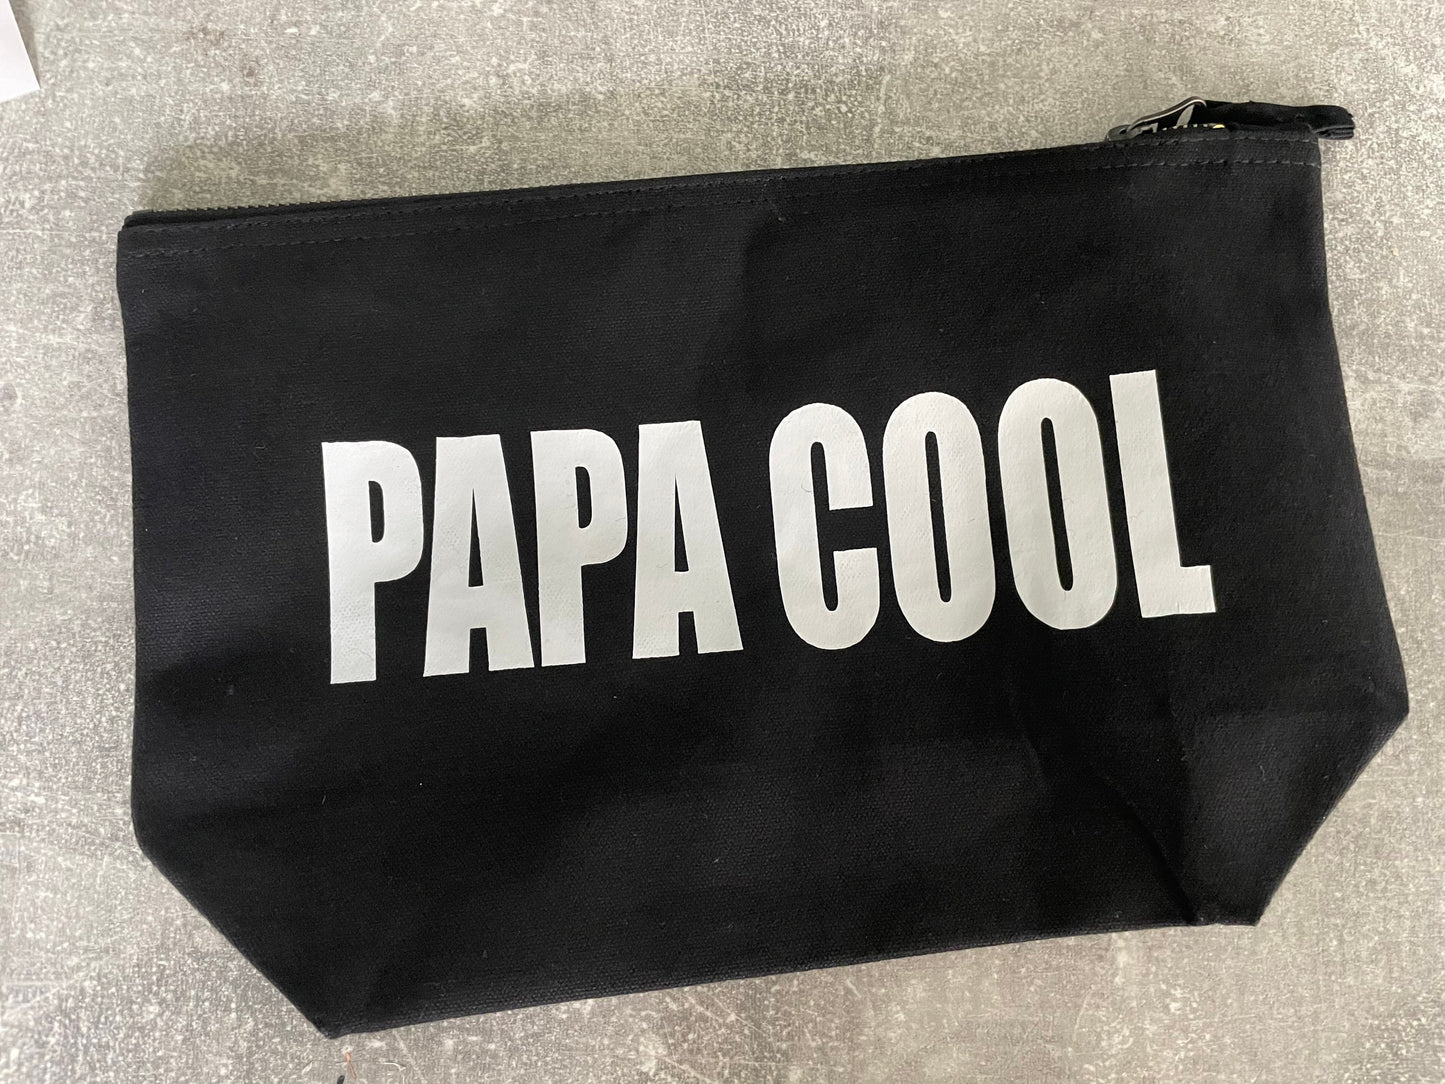 Papa cool, dad gift, toiletry case, Father’s Day gift, gift for men, cool dad gift, papa gifts, black pouch bag, father of the groom gifts